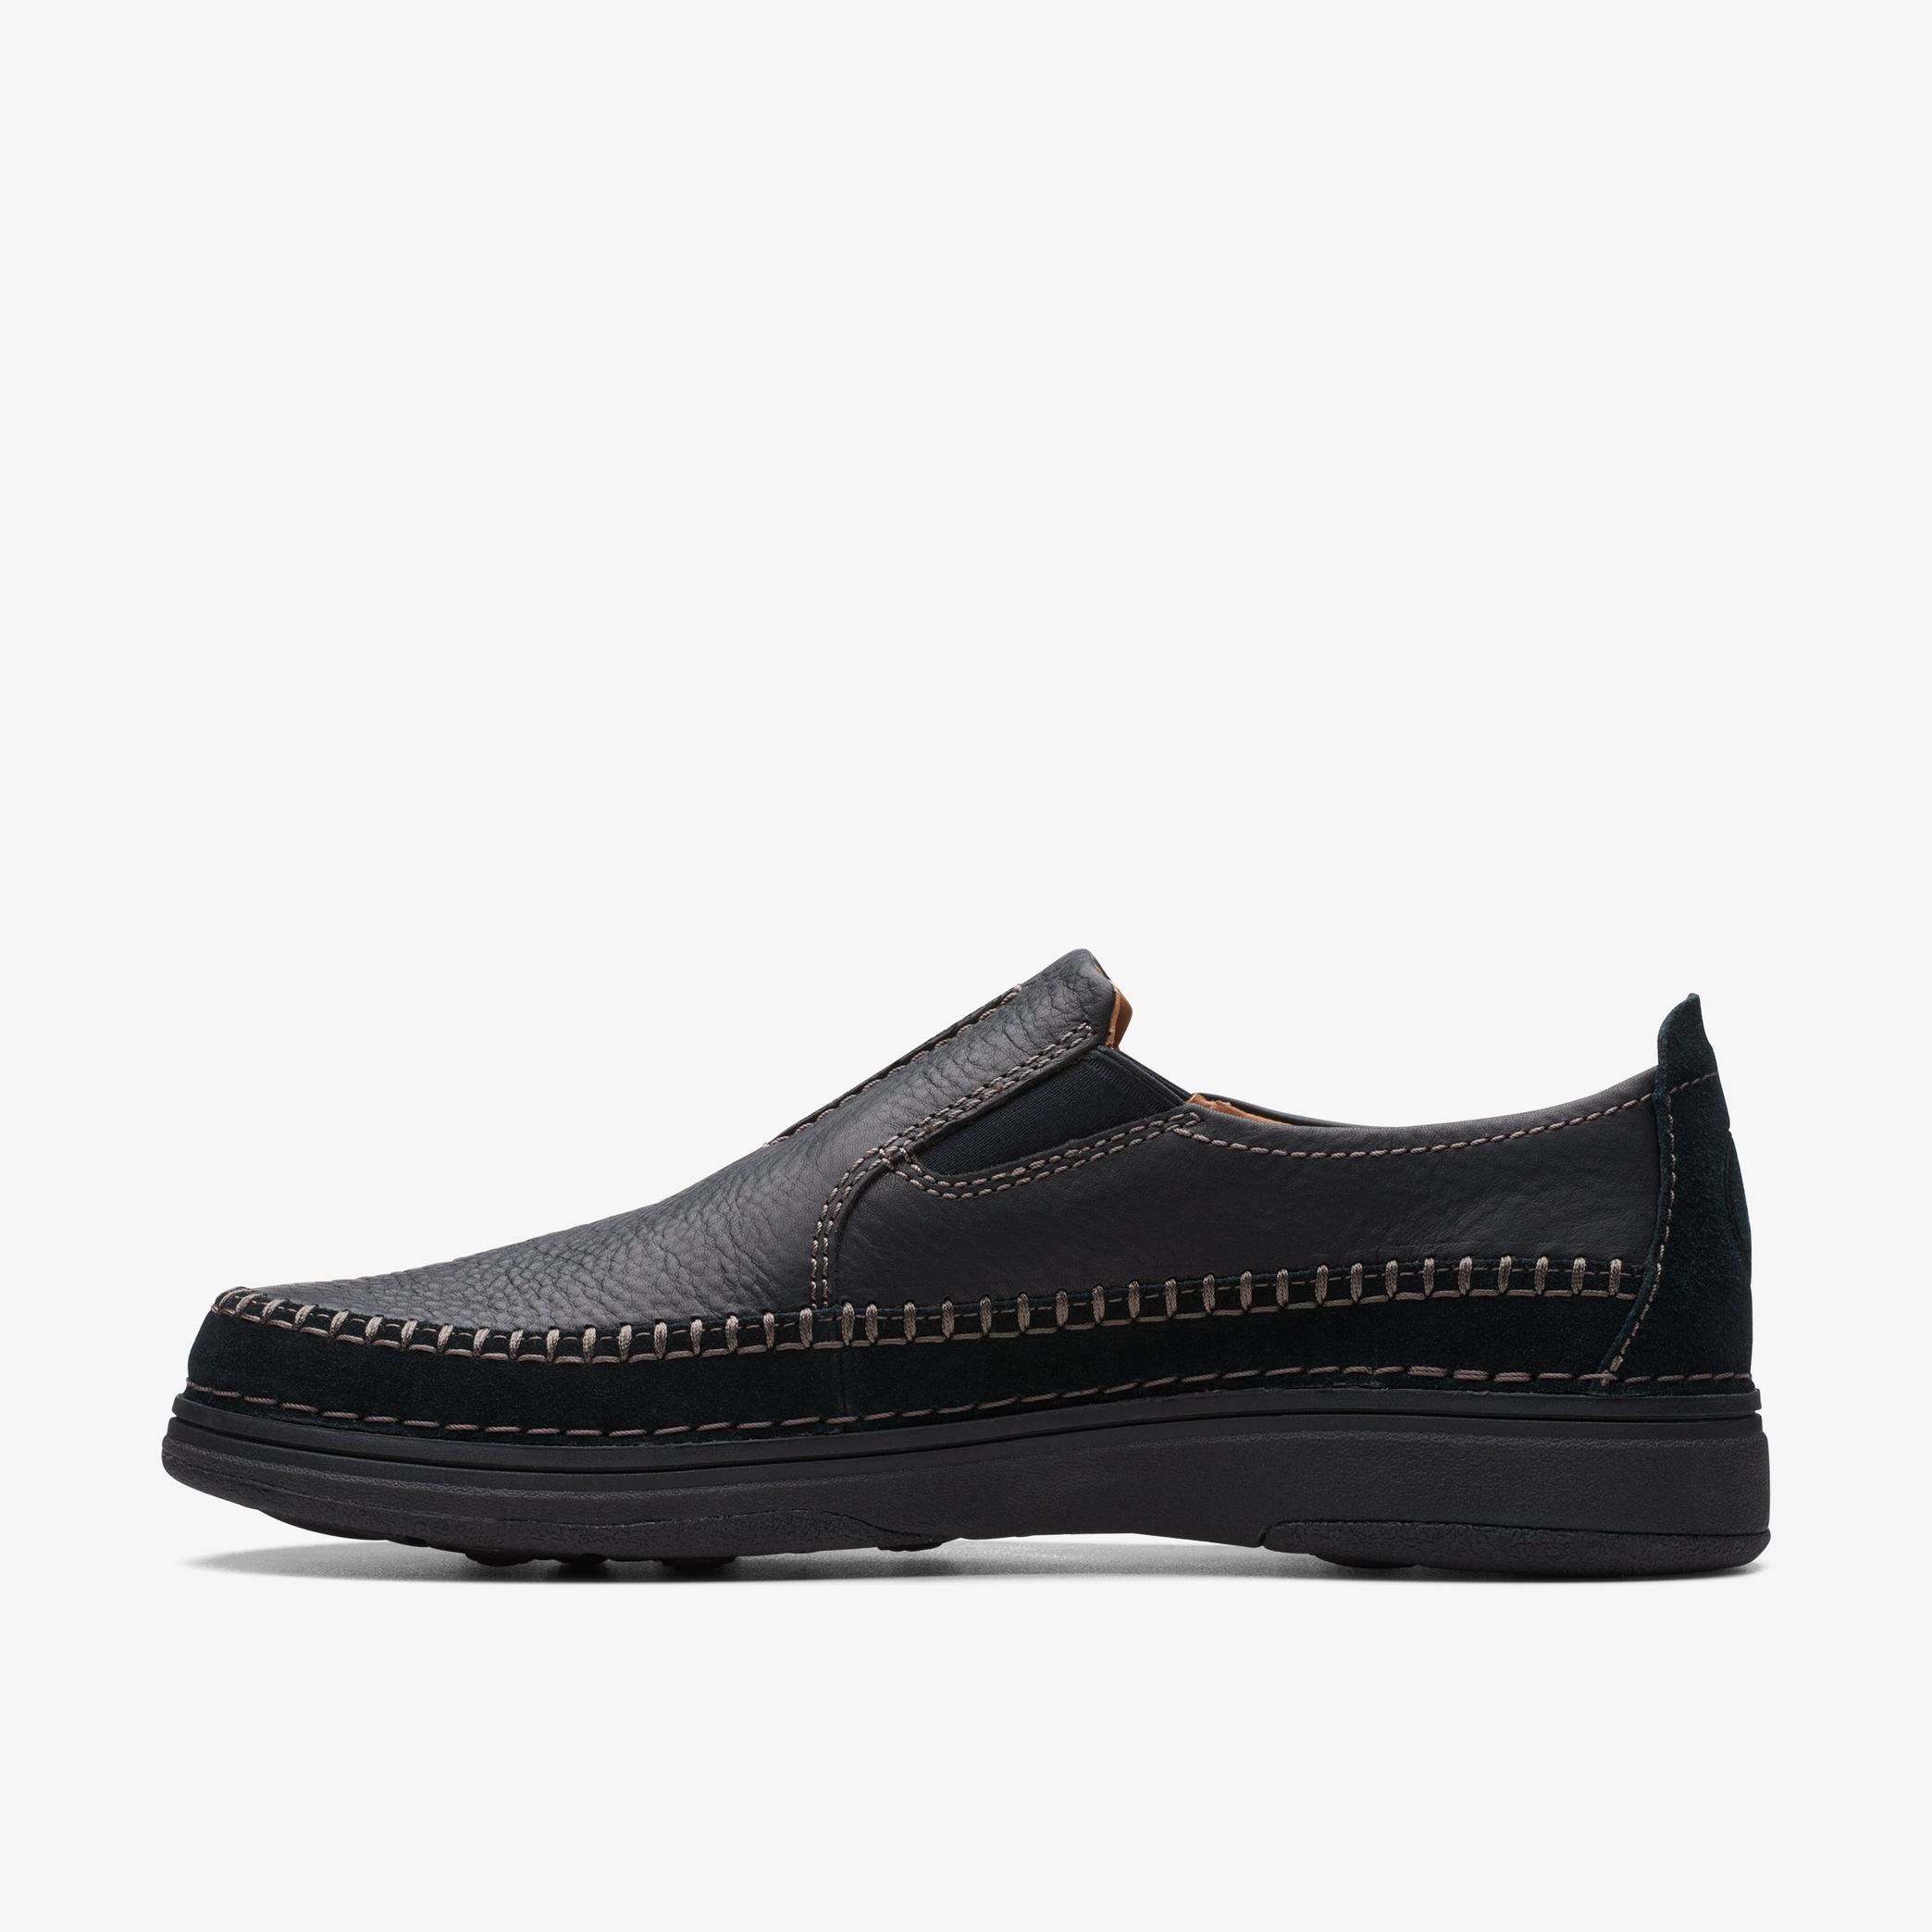 Nature 5 Walk Black Combination Loafers, view 2 of 6